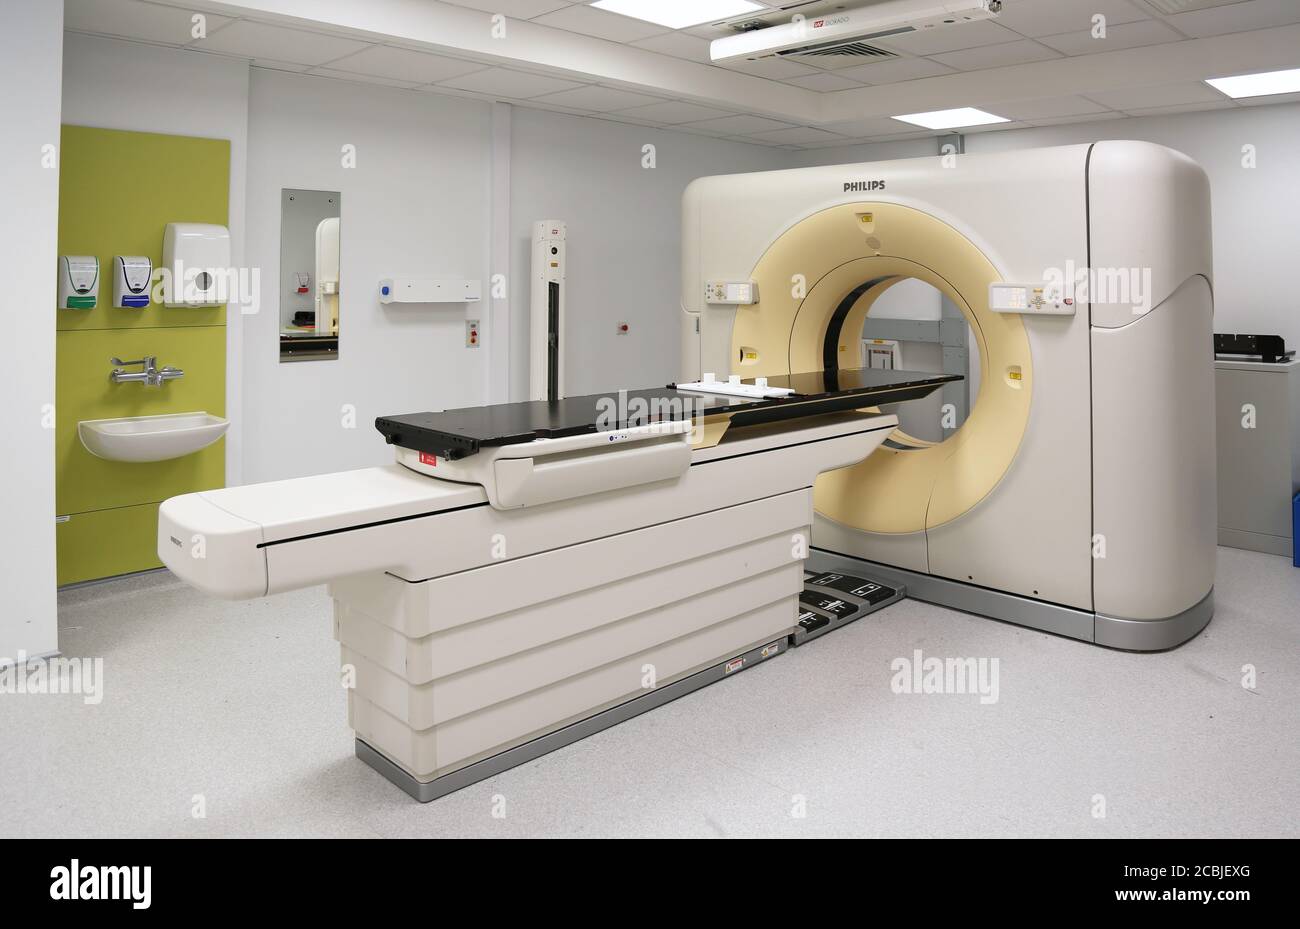 A newly installed Philips CT scanner photographed during commissioning at Eastbourne Hospital, East Sussex, UK Stock Photo